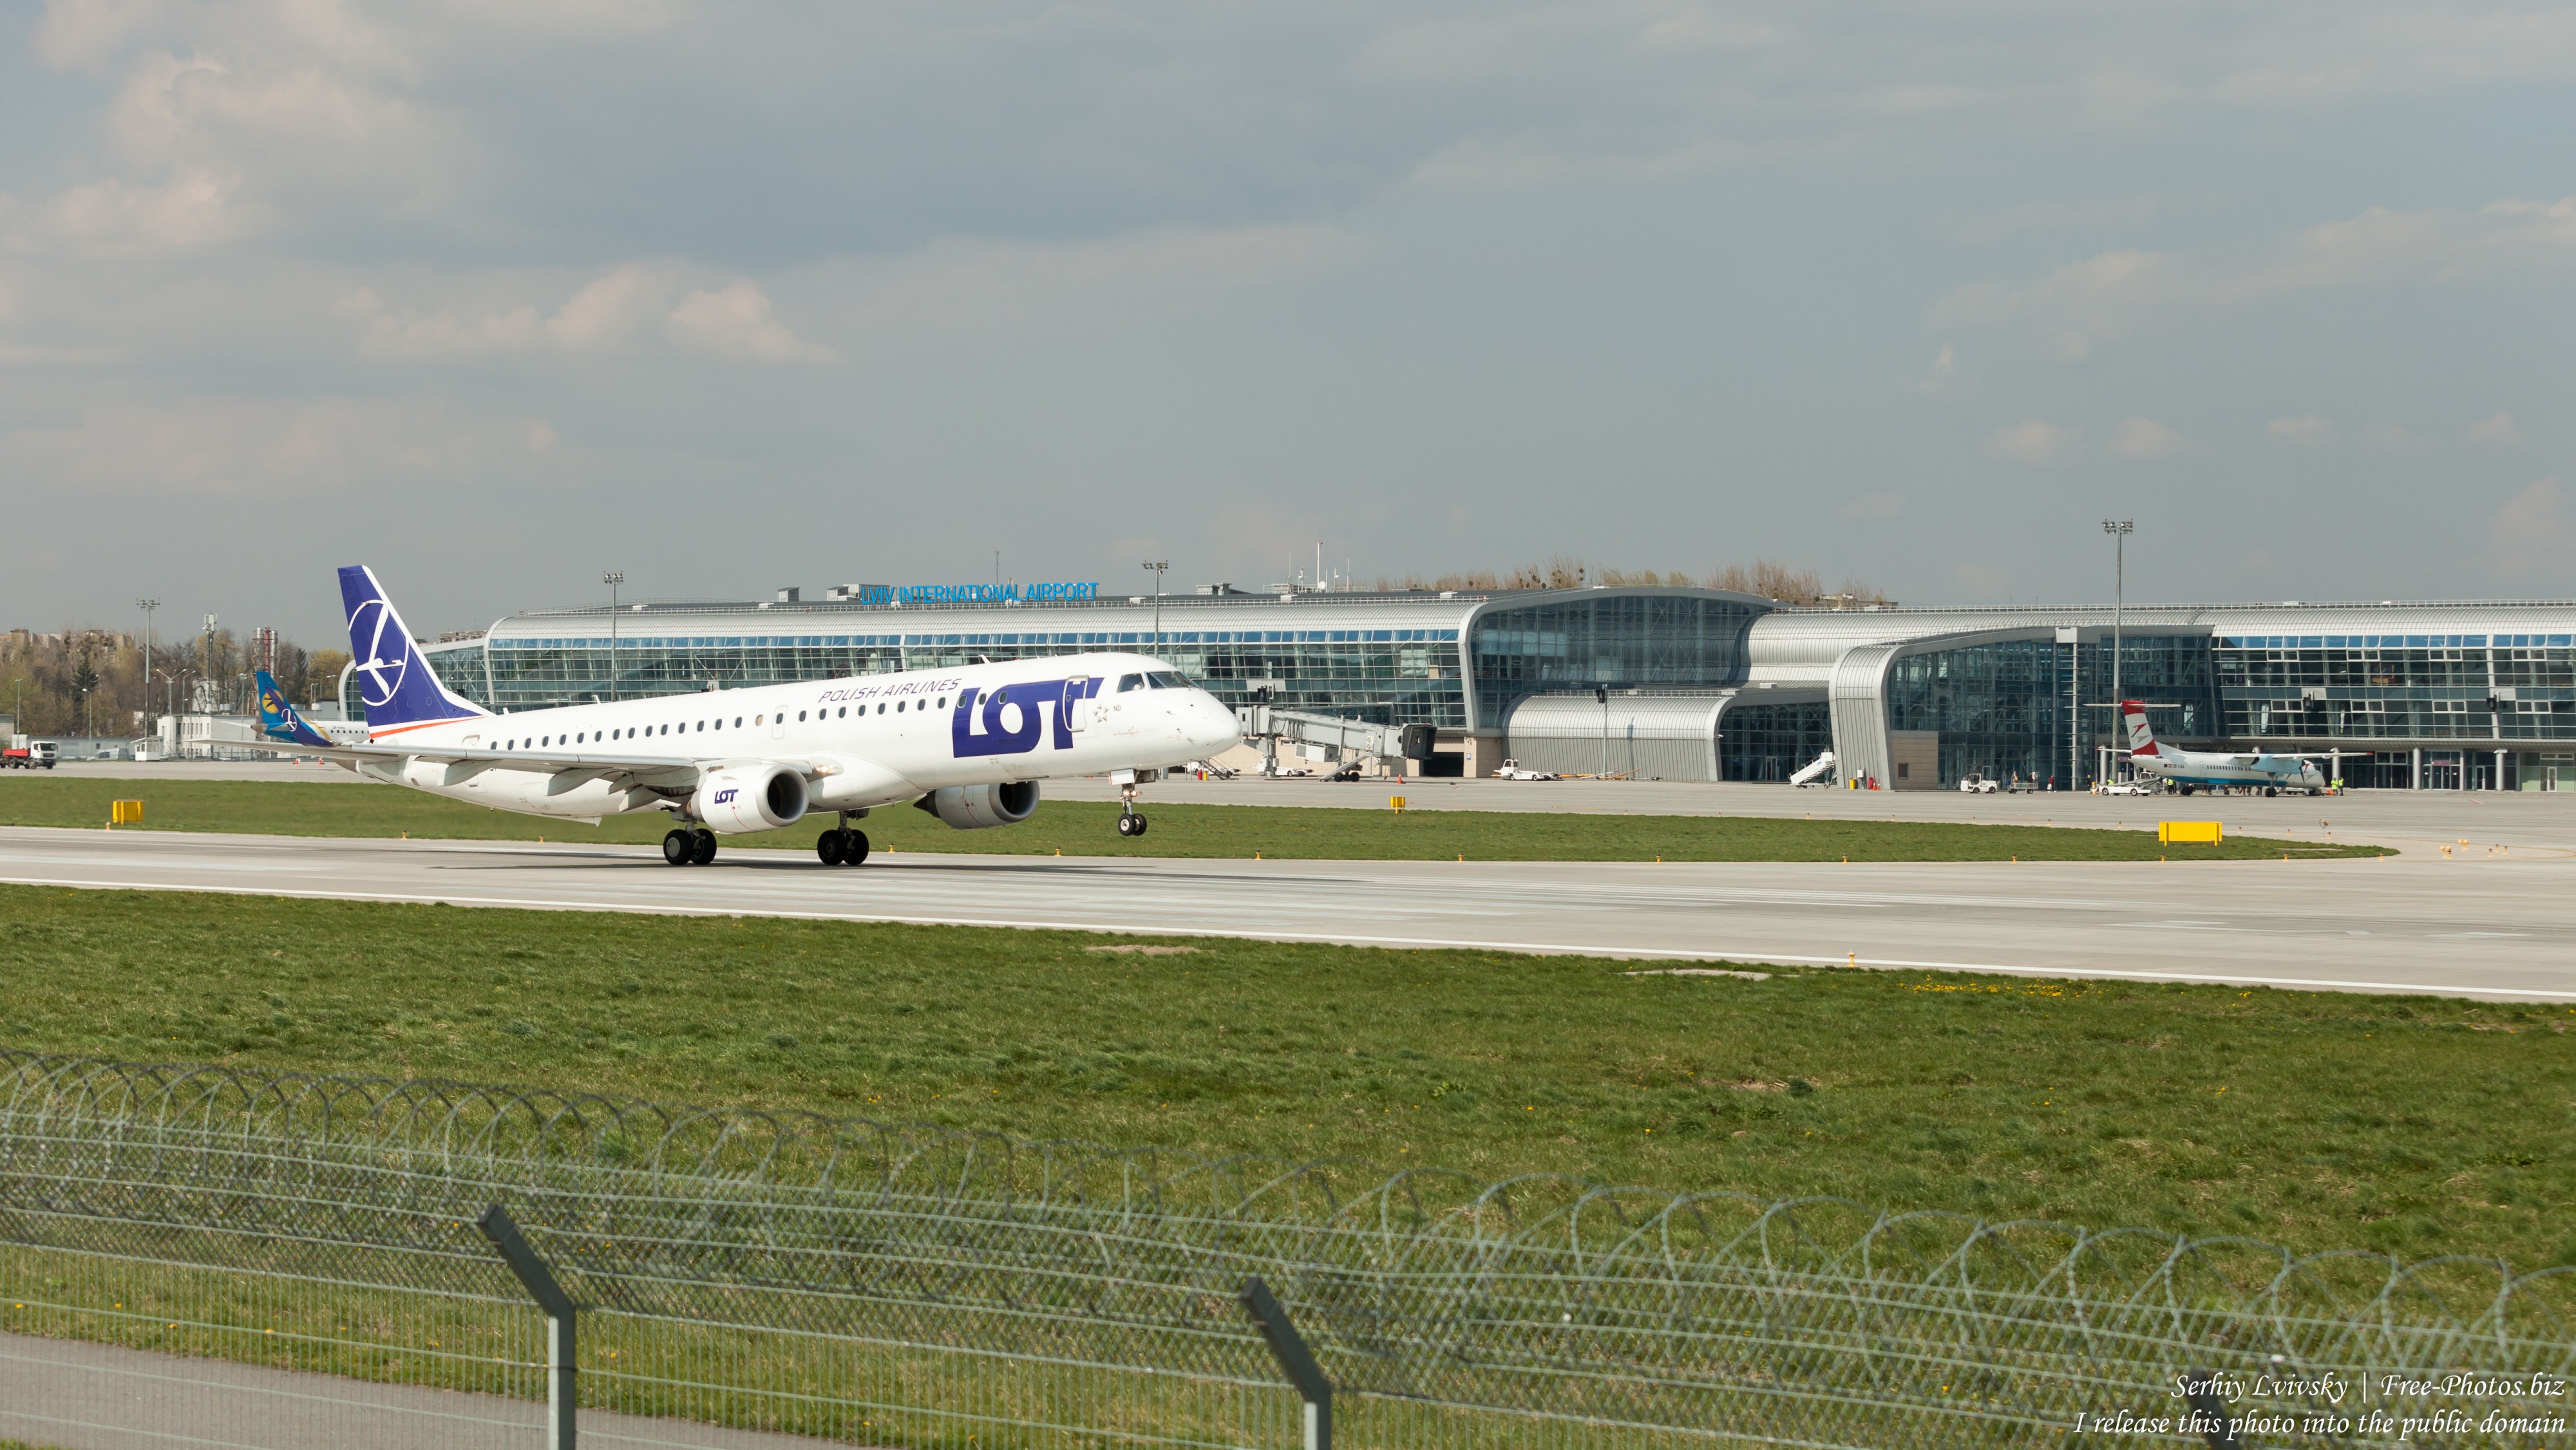 Lviv airport photographed in April 2019 by Serhiy Lvivsky, picture 11